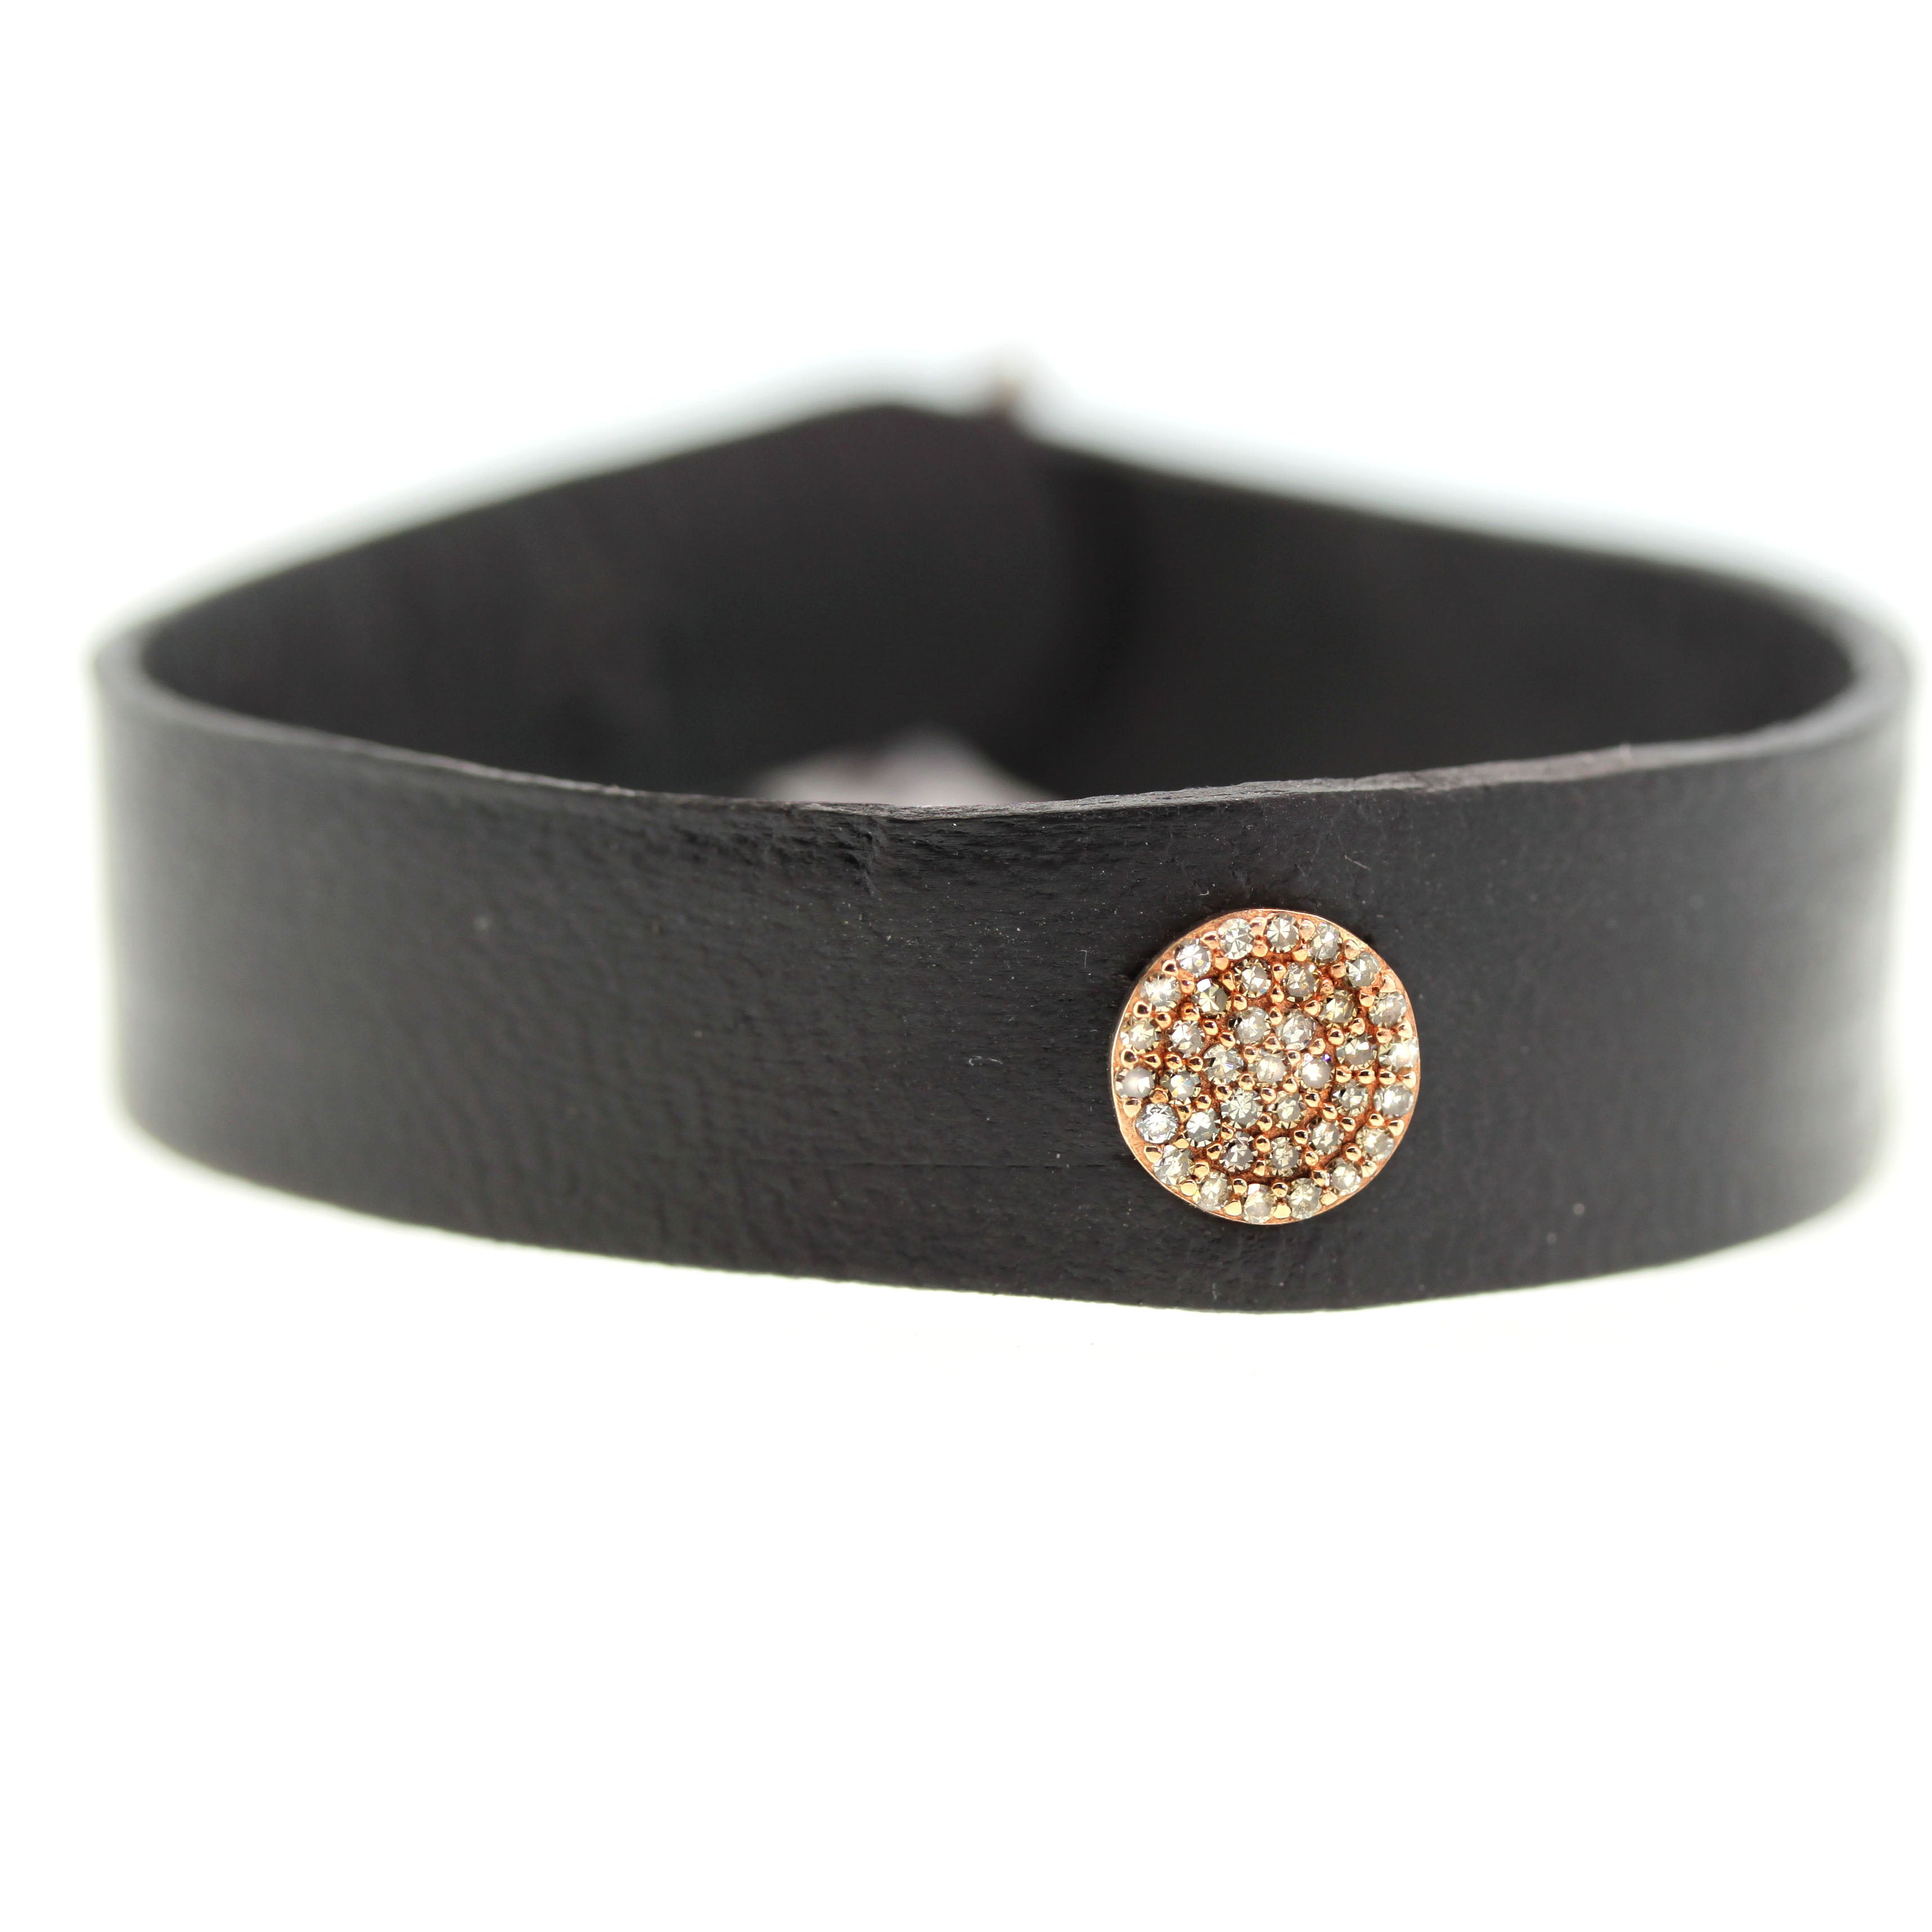 Diamond Rose Disc Leather Bracelet , hand cut, hand dyed black leather leather, rebecca lankford designs, houston, TX